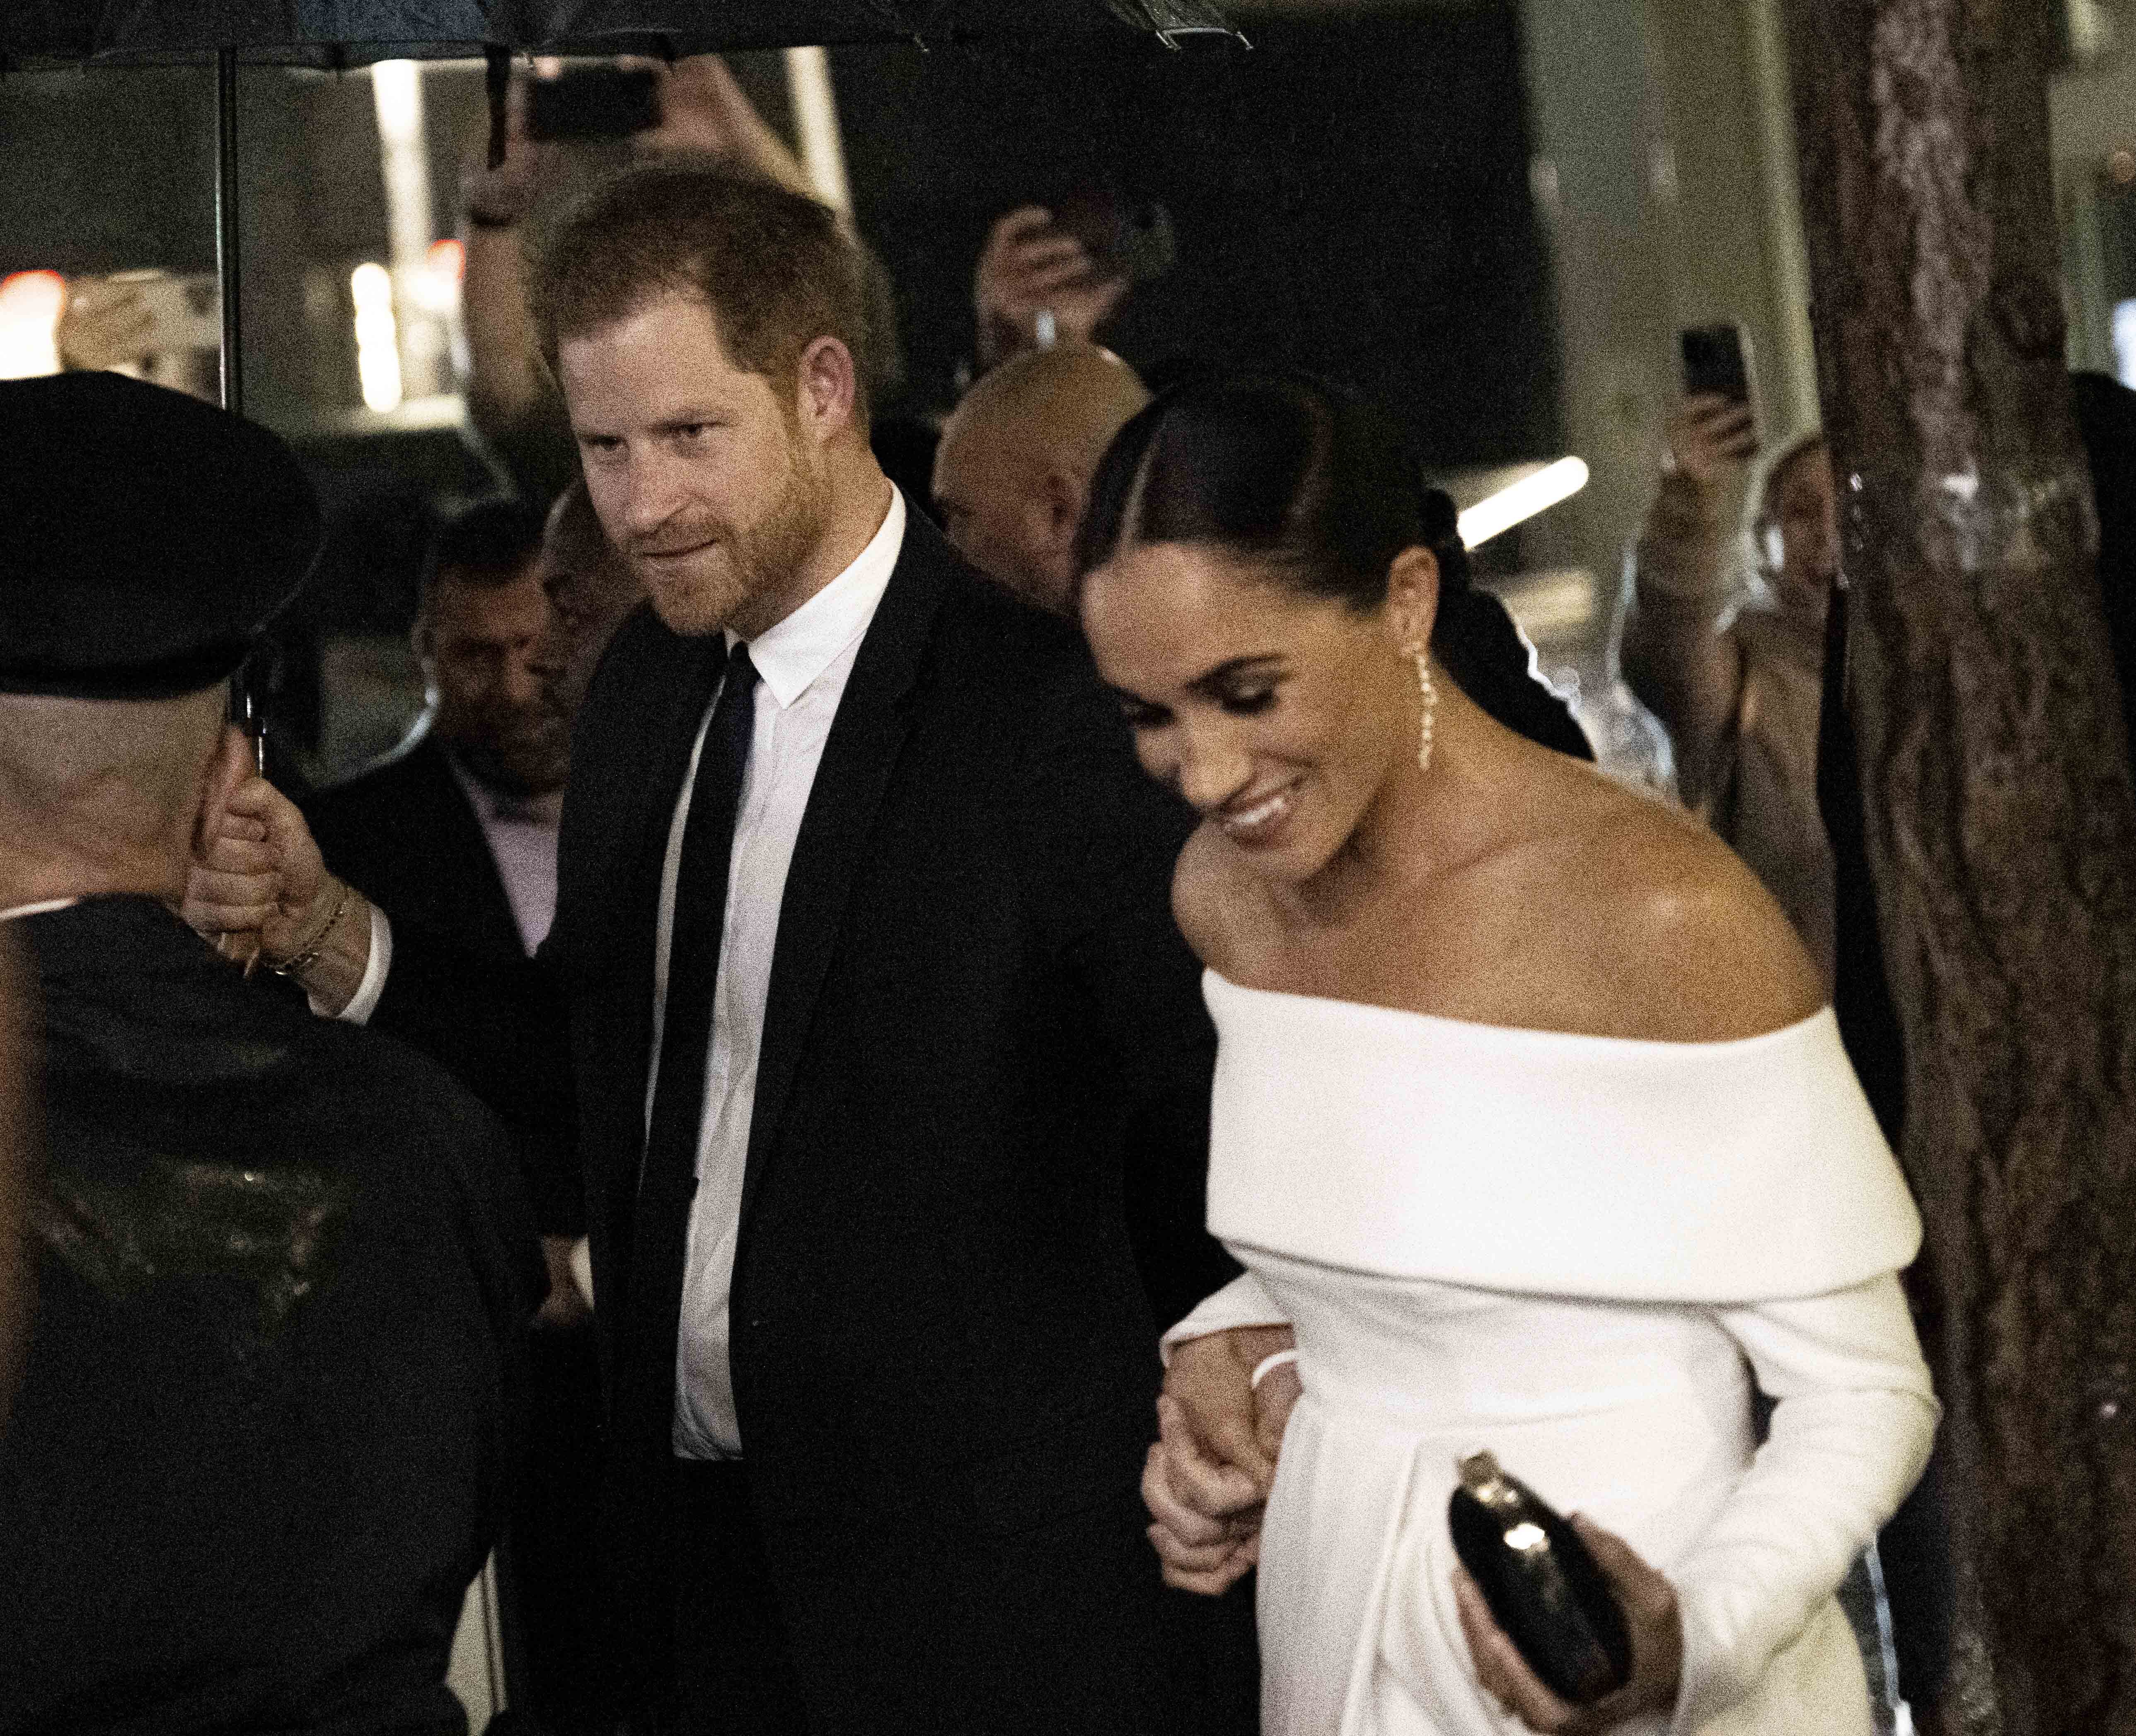 Prince Harry, Duke of Sussex, and his wife, Duchess Meghan Markle at the Ripple of Hope Awards Gala in New York on December 6, 2022 | Source: Getty Images